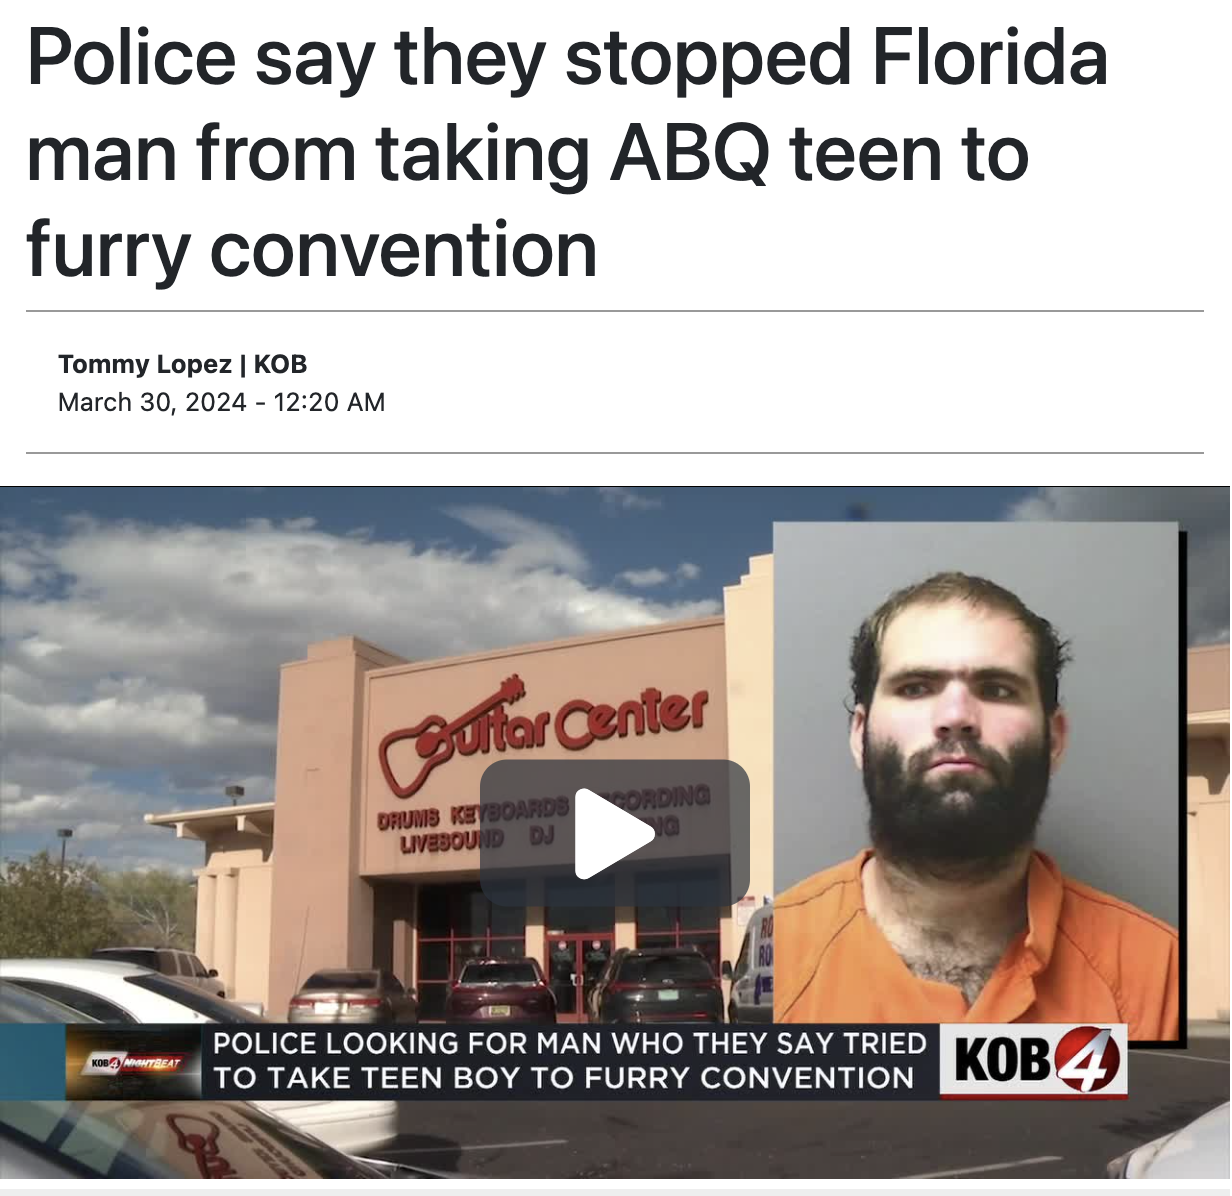 media - Police say they stopped Florida man from taking Abq teen to furry convention Tommy Lopez | Kob Cuitor Center Drand Iceboards Livebound Dj Ording Police Looking For Man Who They Say Tried To Take Teen Boy To Furry Convention KOB4